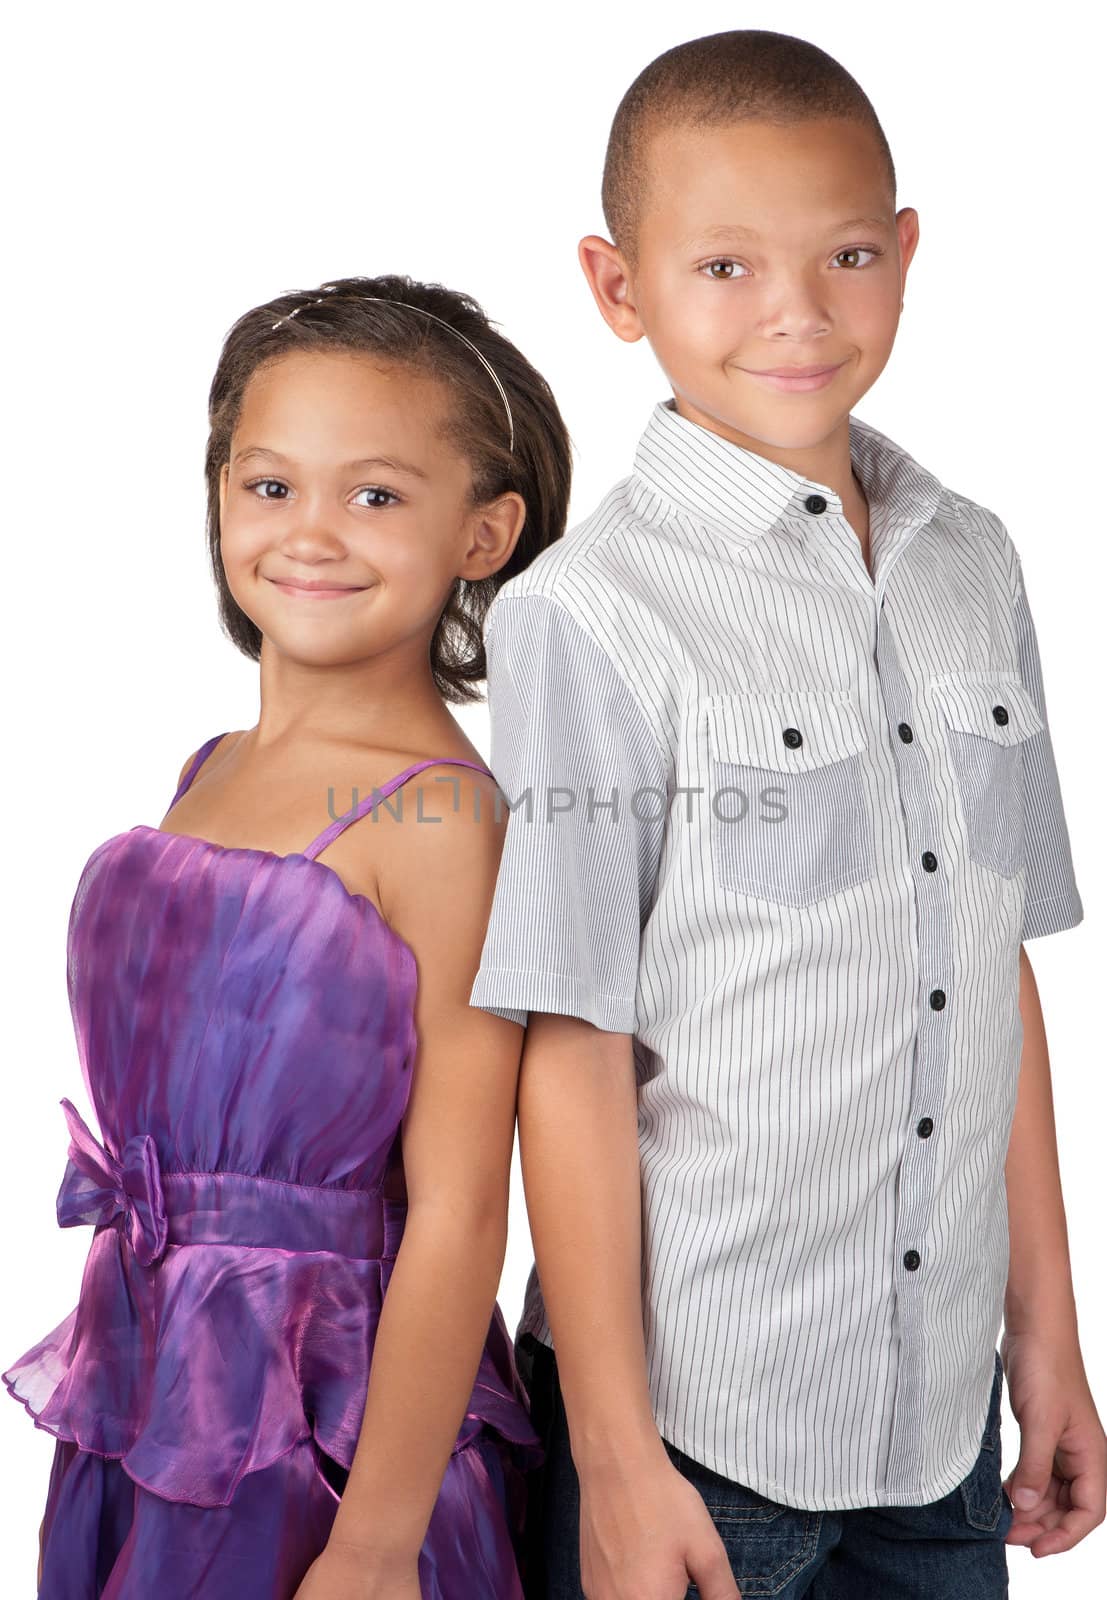 A brother and sister smile happily whilst standing close to each other.